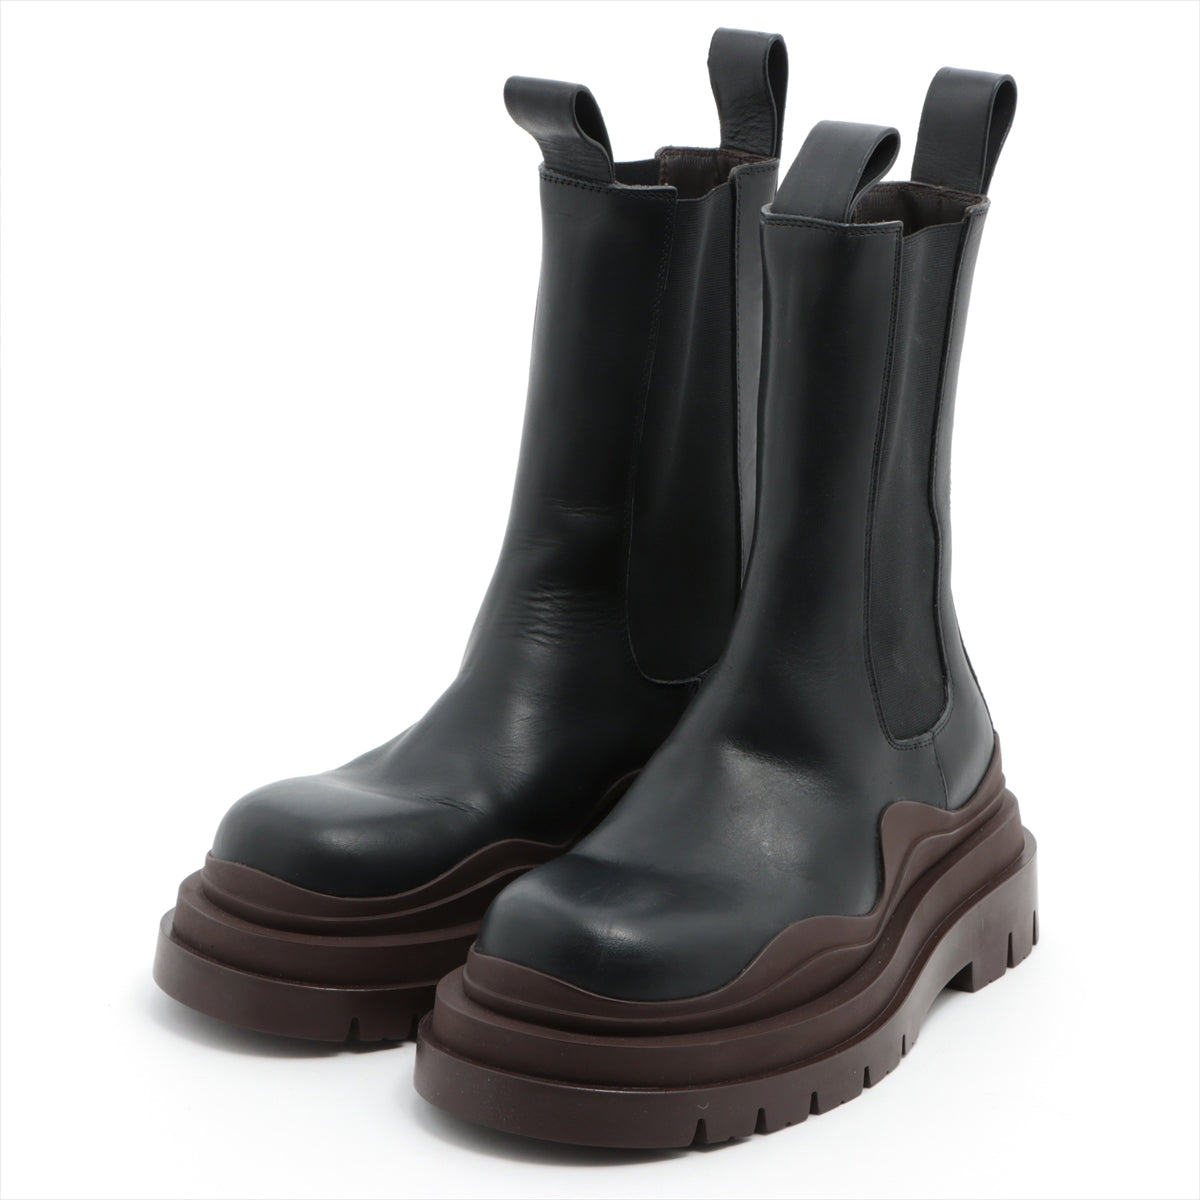 Bottega Veneta Leather Side Gore Boots 39 Men's Black tyres chelsea boots box There is a bag